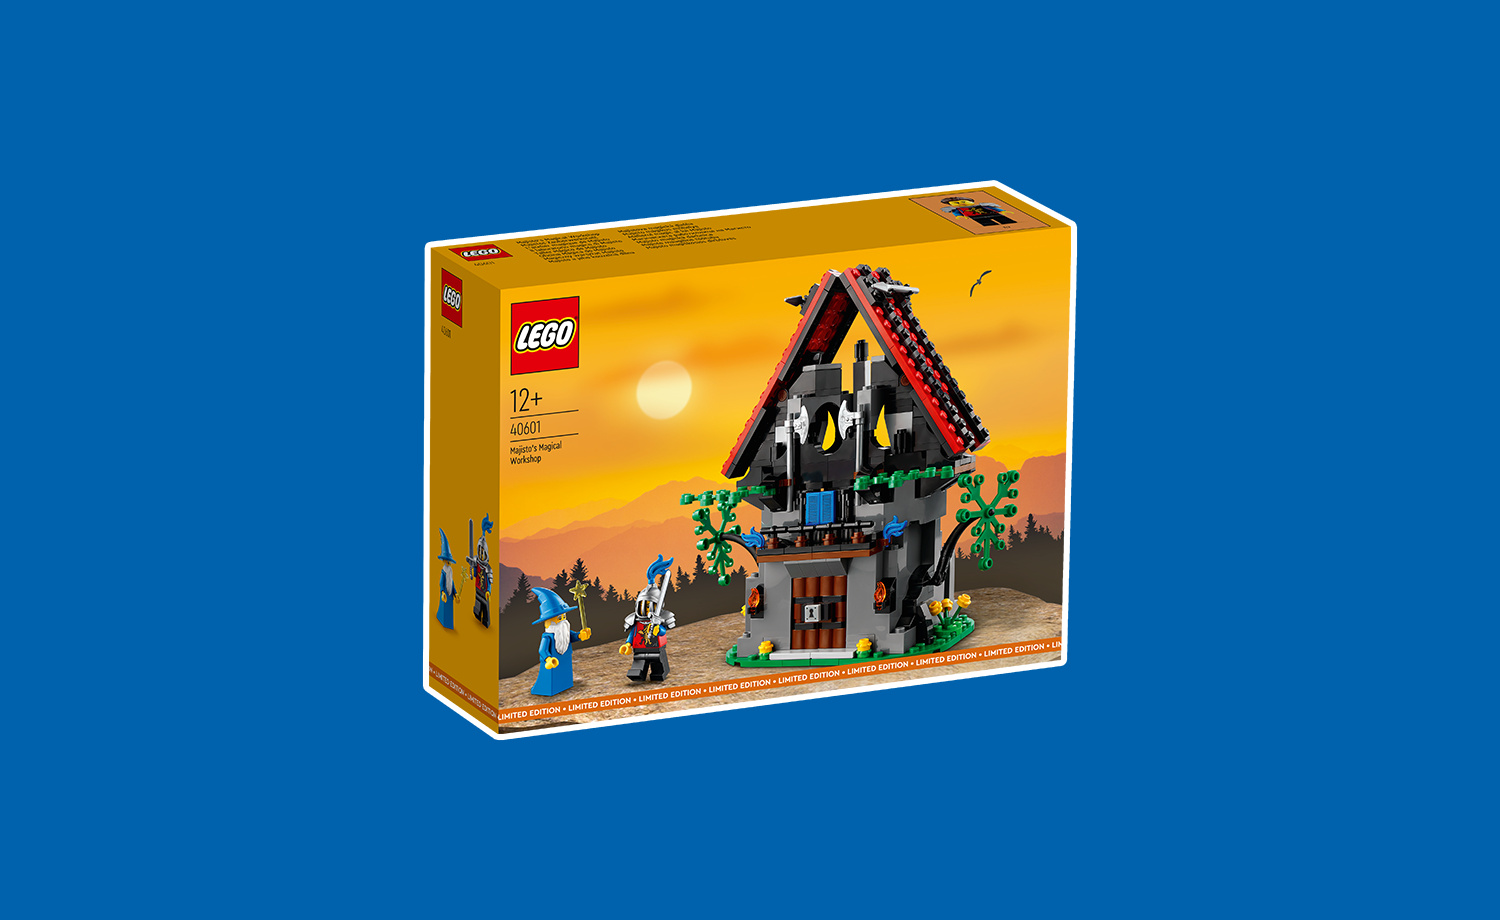 The Brick Shop LEGO Certified Store - LEGO® BUY 2 GET 1 FREE